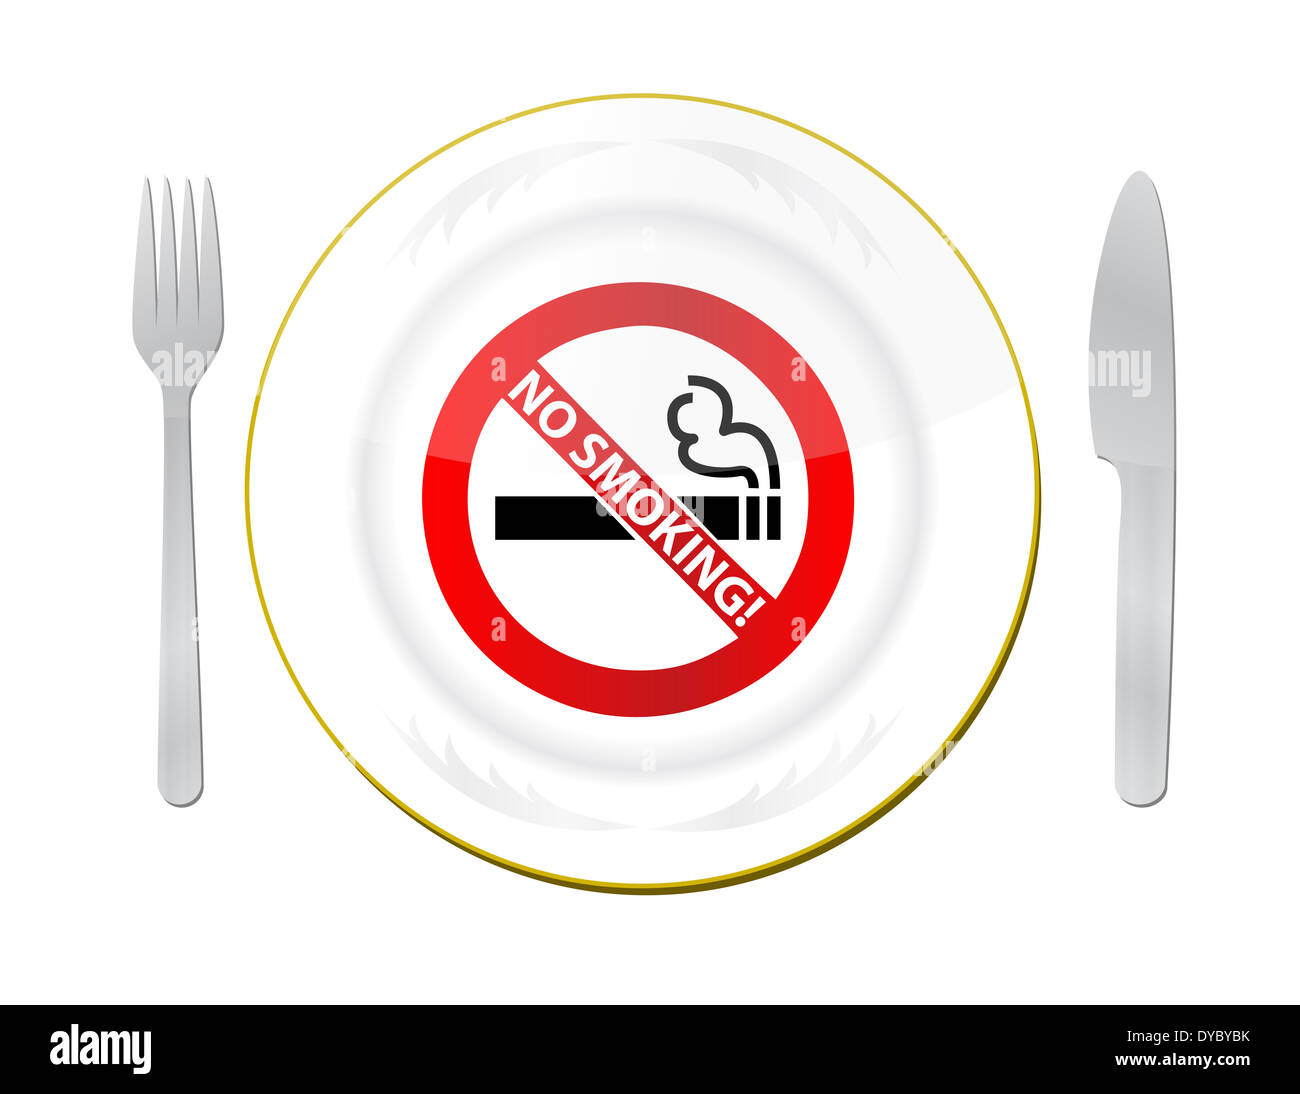 no smoking in this area illustration design over white Stock Photo